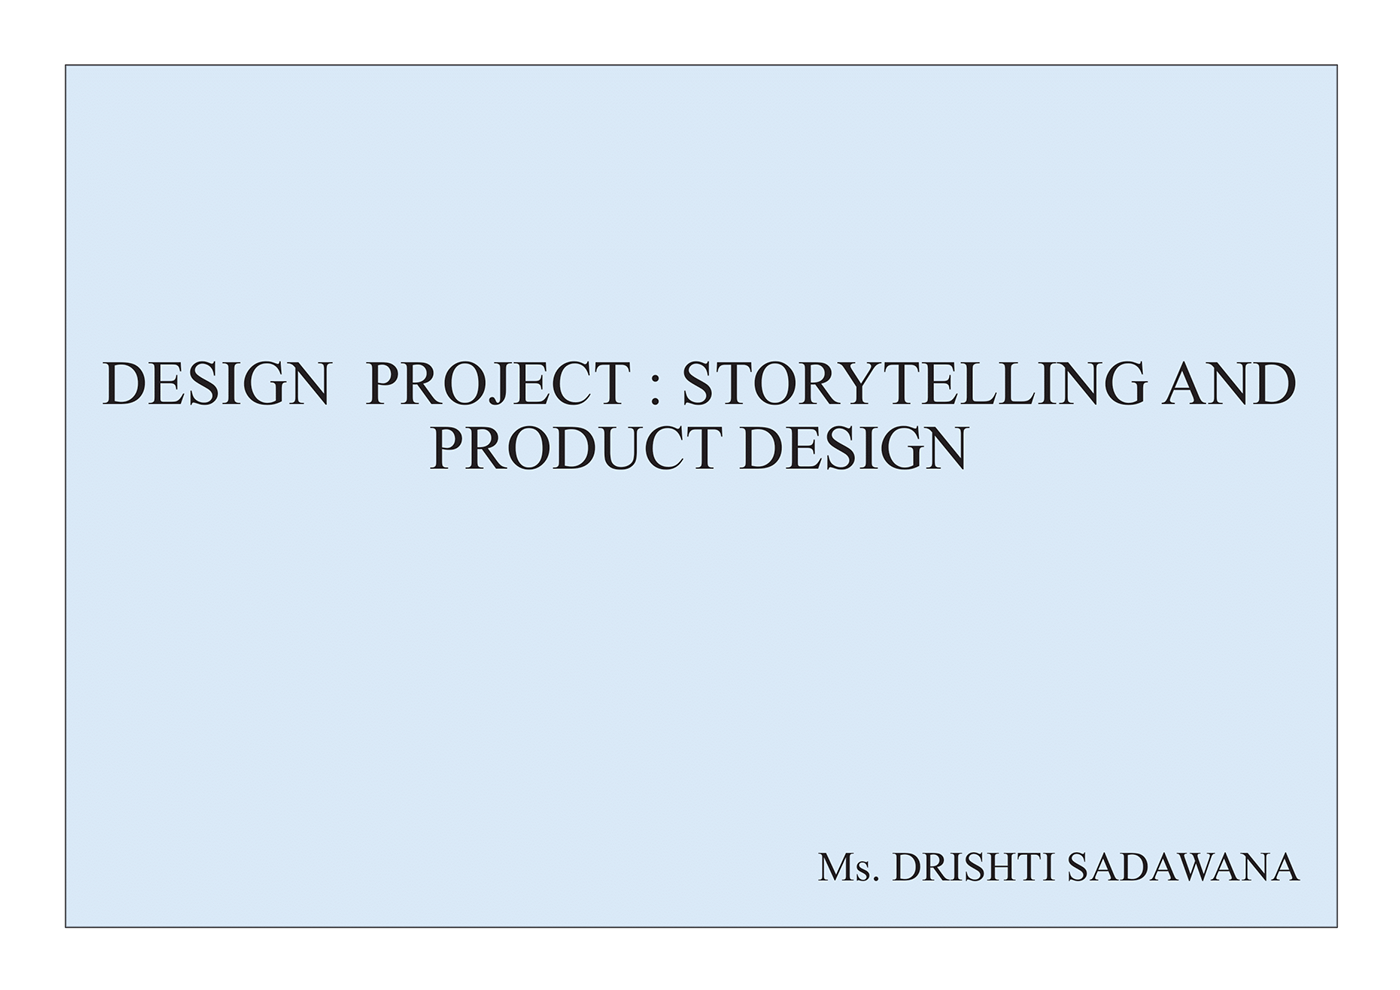 storytelling   ILLUSTRATION  product design  market research research design